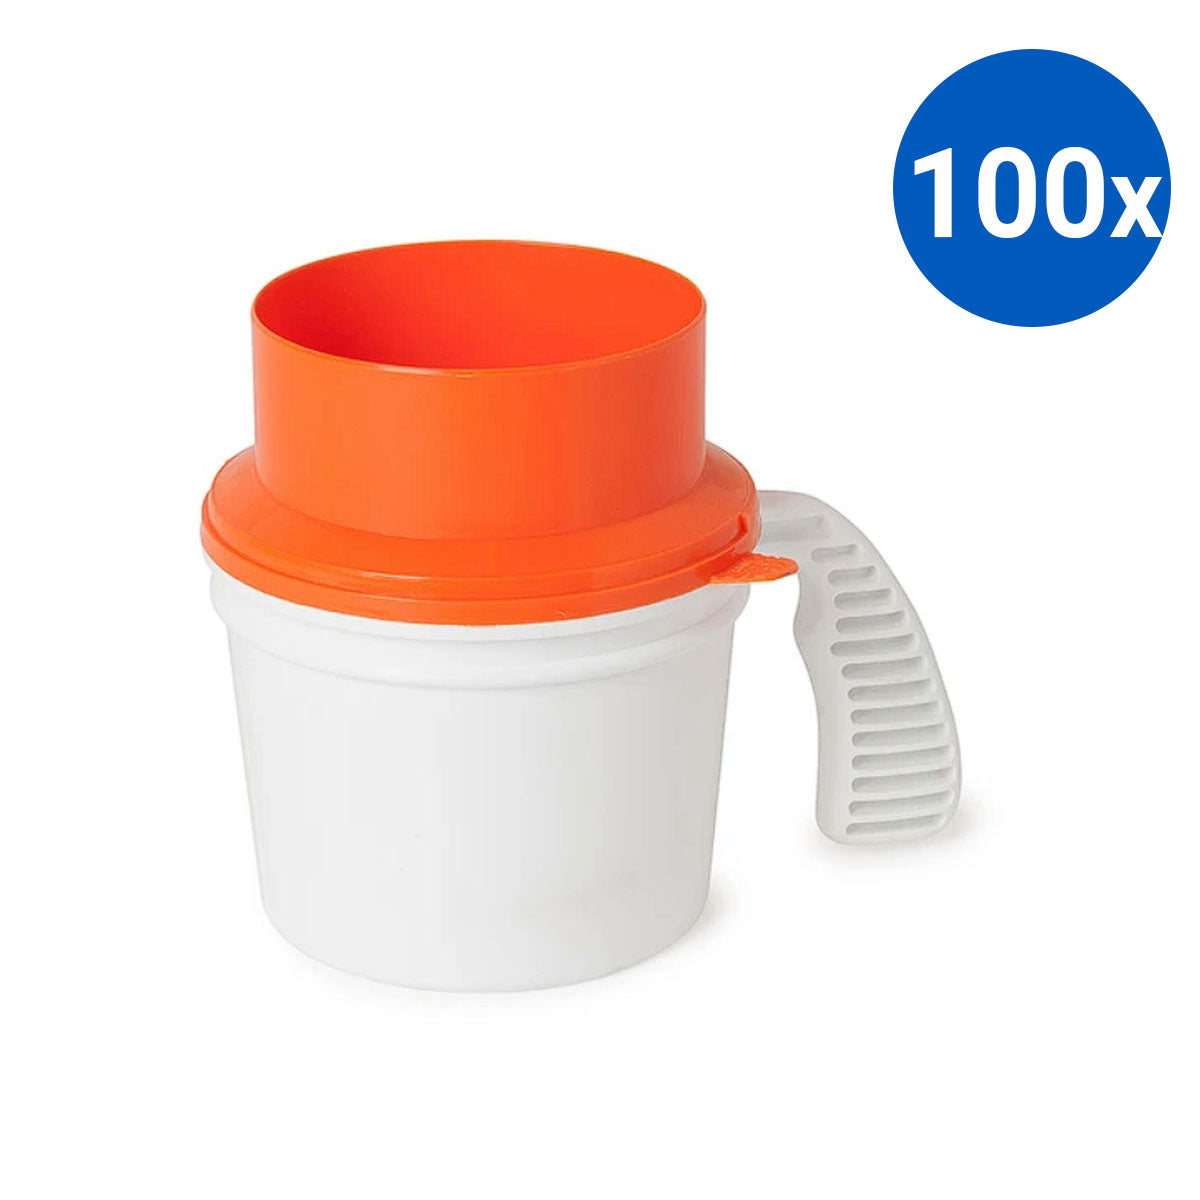 100x Collection Container Base and Quick Drop Lid - Orange